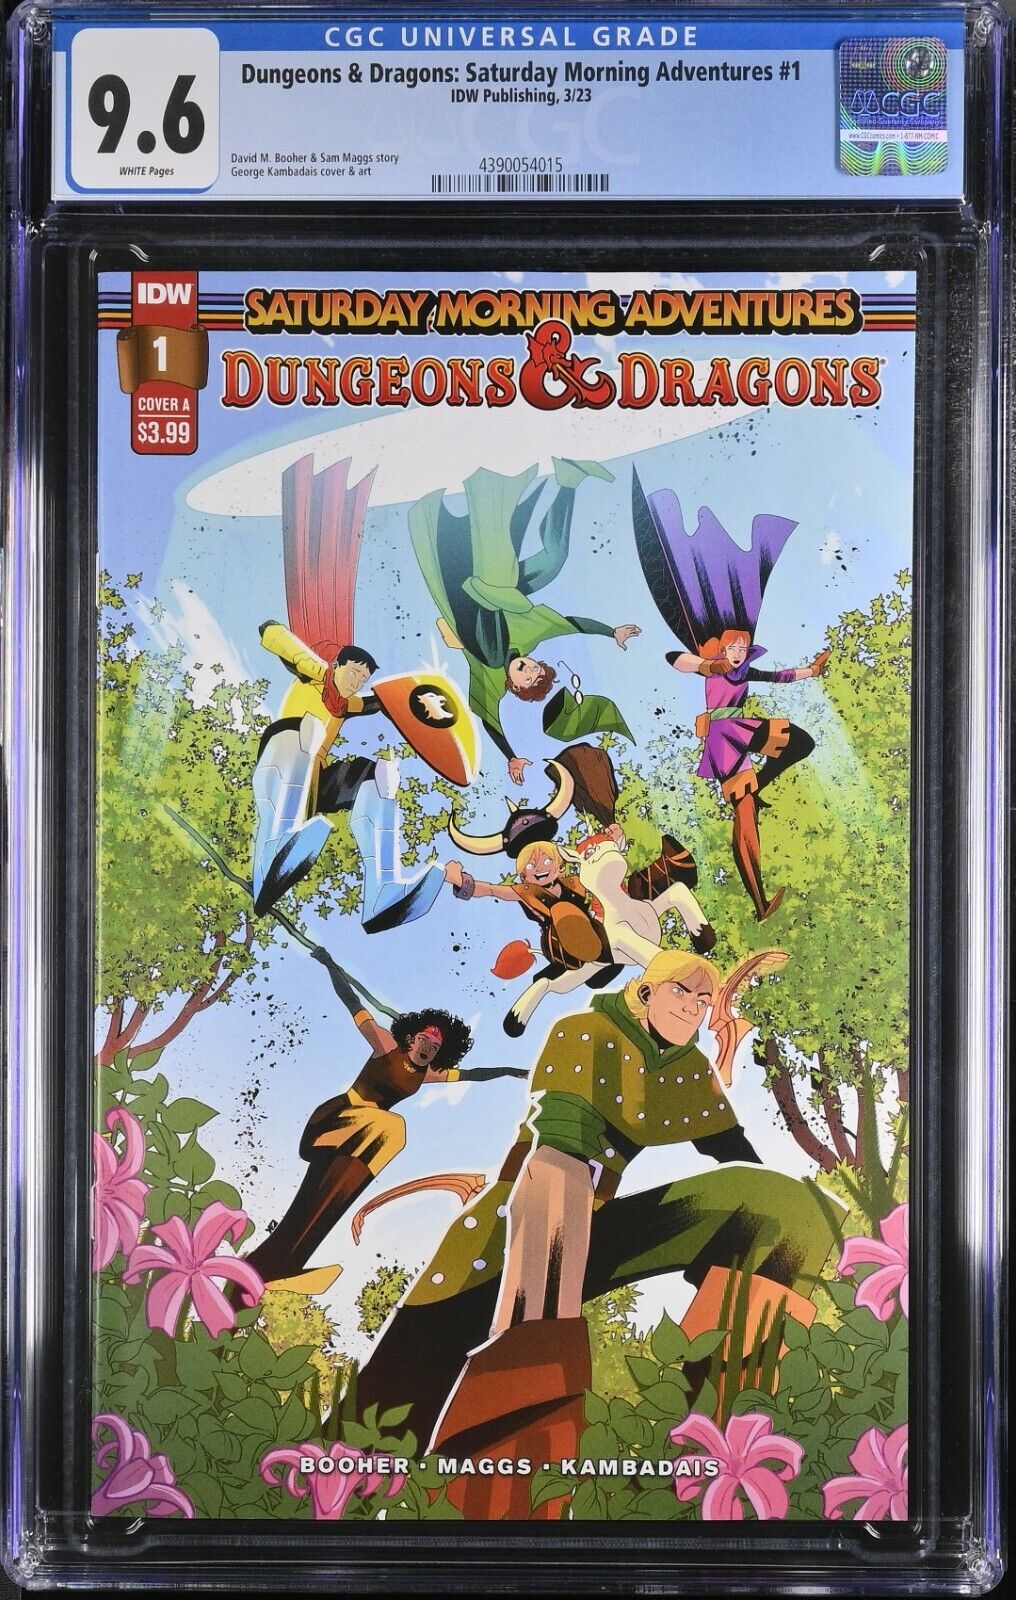 Dungeons & Dragons: Saturday Morning Adventures #1 CGC 9.6 (IDW 2023) Cover A